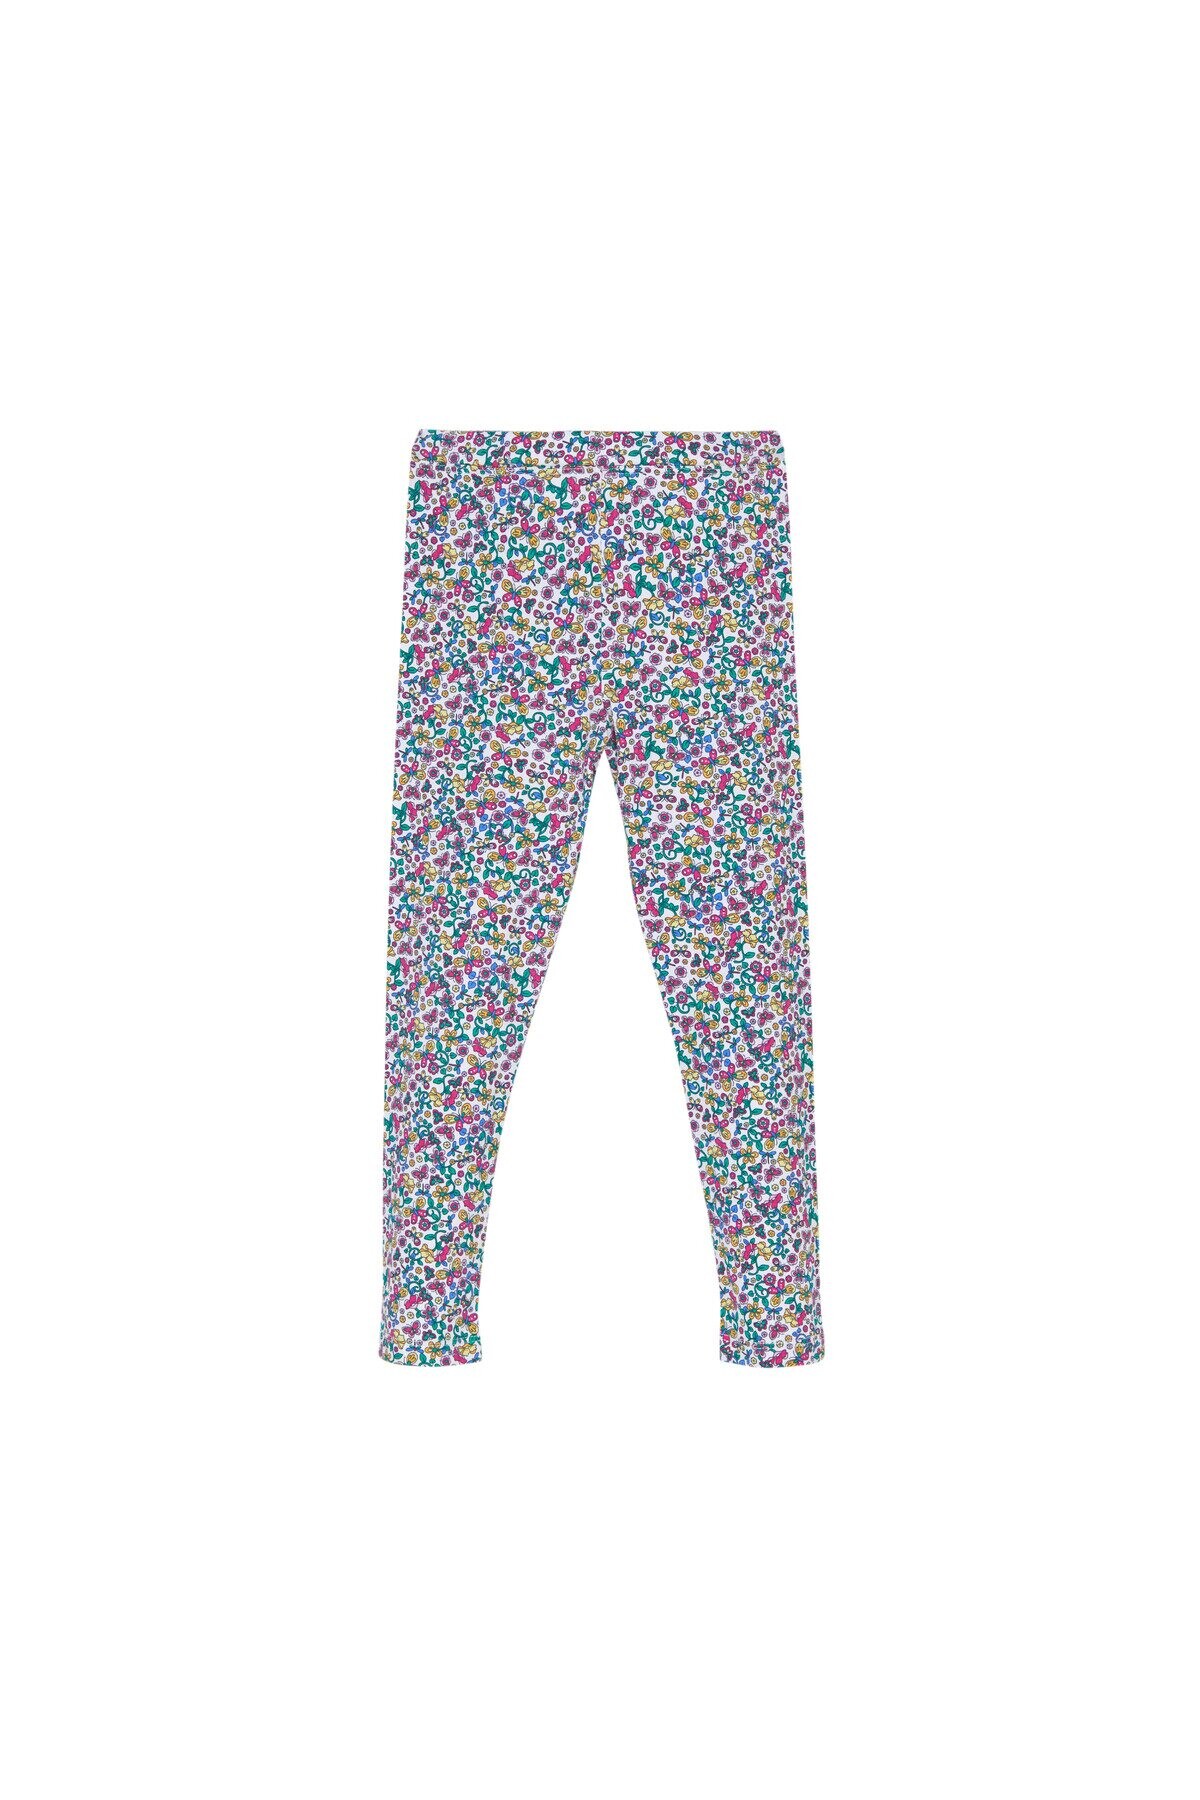 5-8 Years Old Tiny Butterfly Pattern Legging